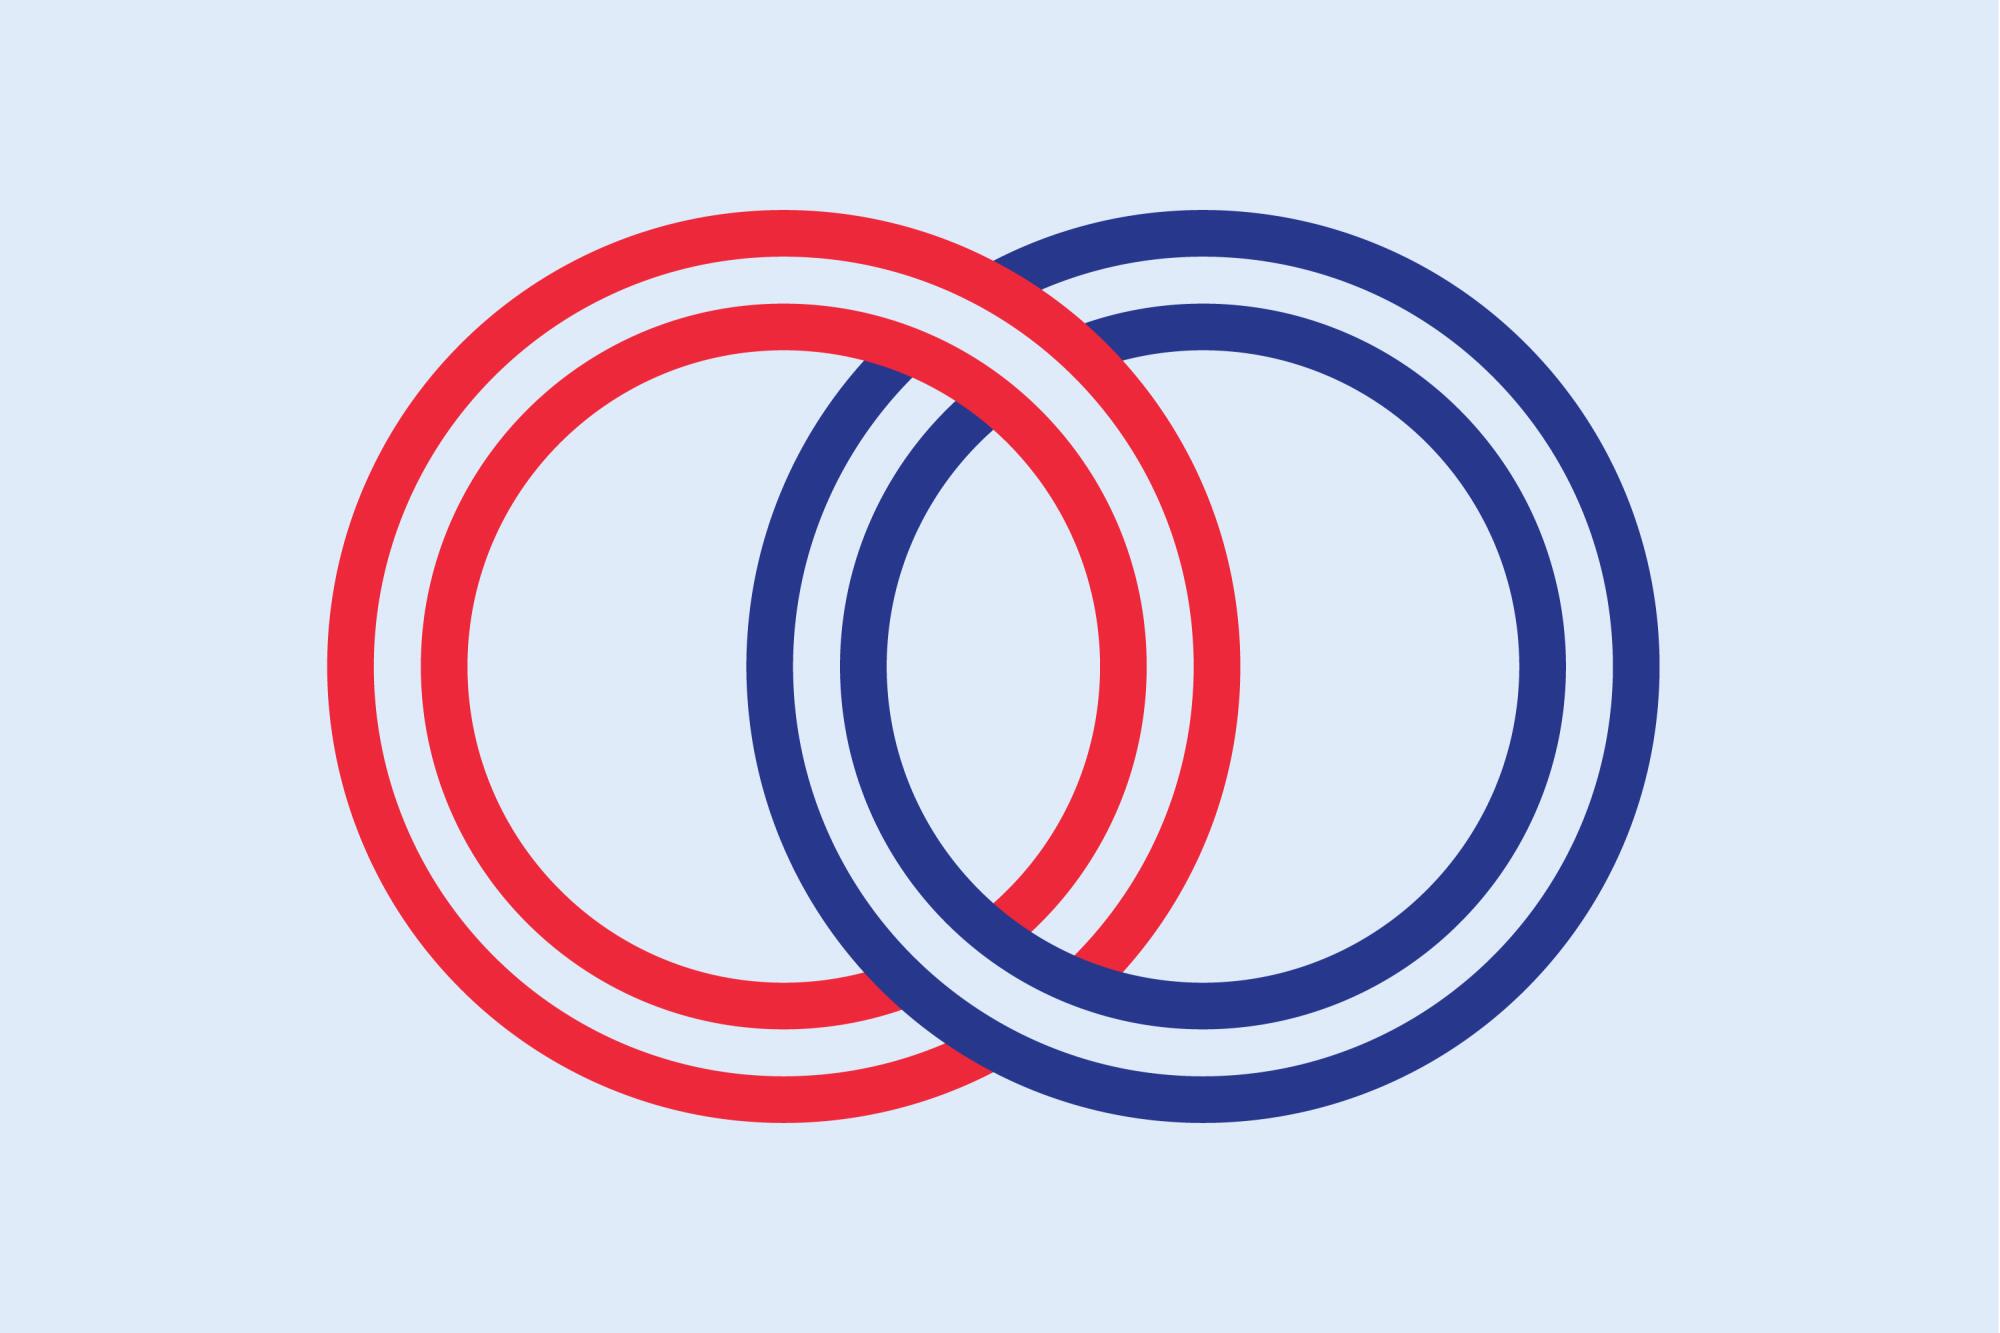 two interlocking wedding rings in red and blue